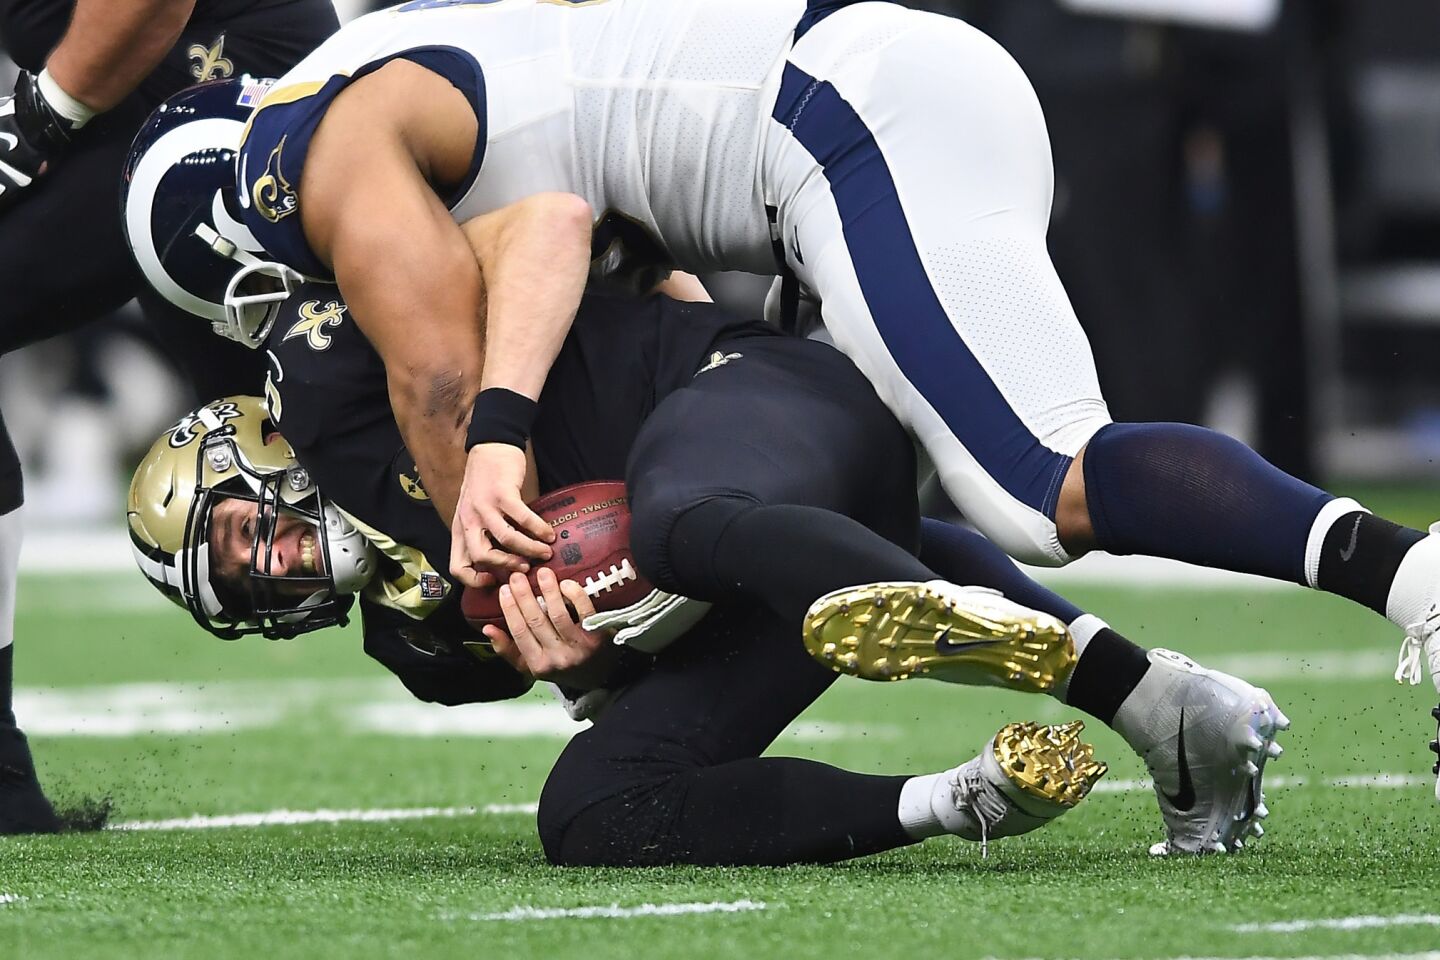 Rams defensive lineman Ndamukong Suh sacks Saints quarterback Drew Brees in the second quarter in the NFC Championship at the Superdome on Jan. 20.